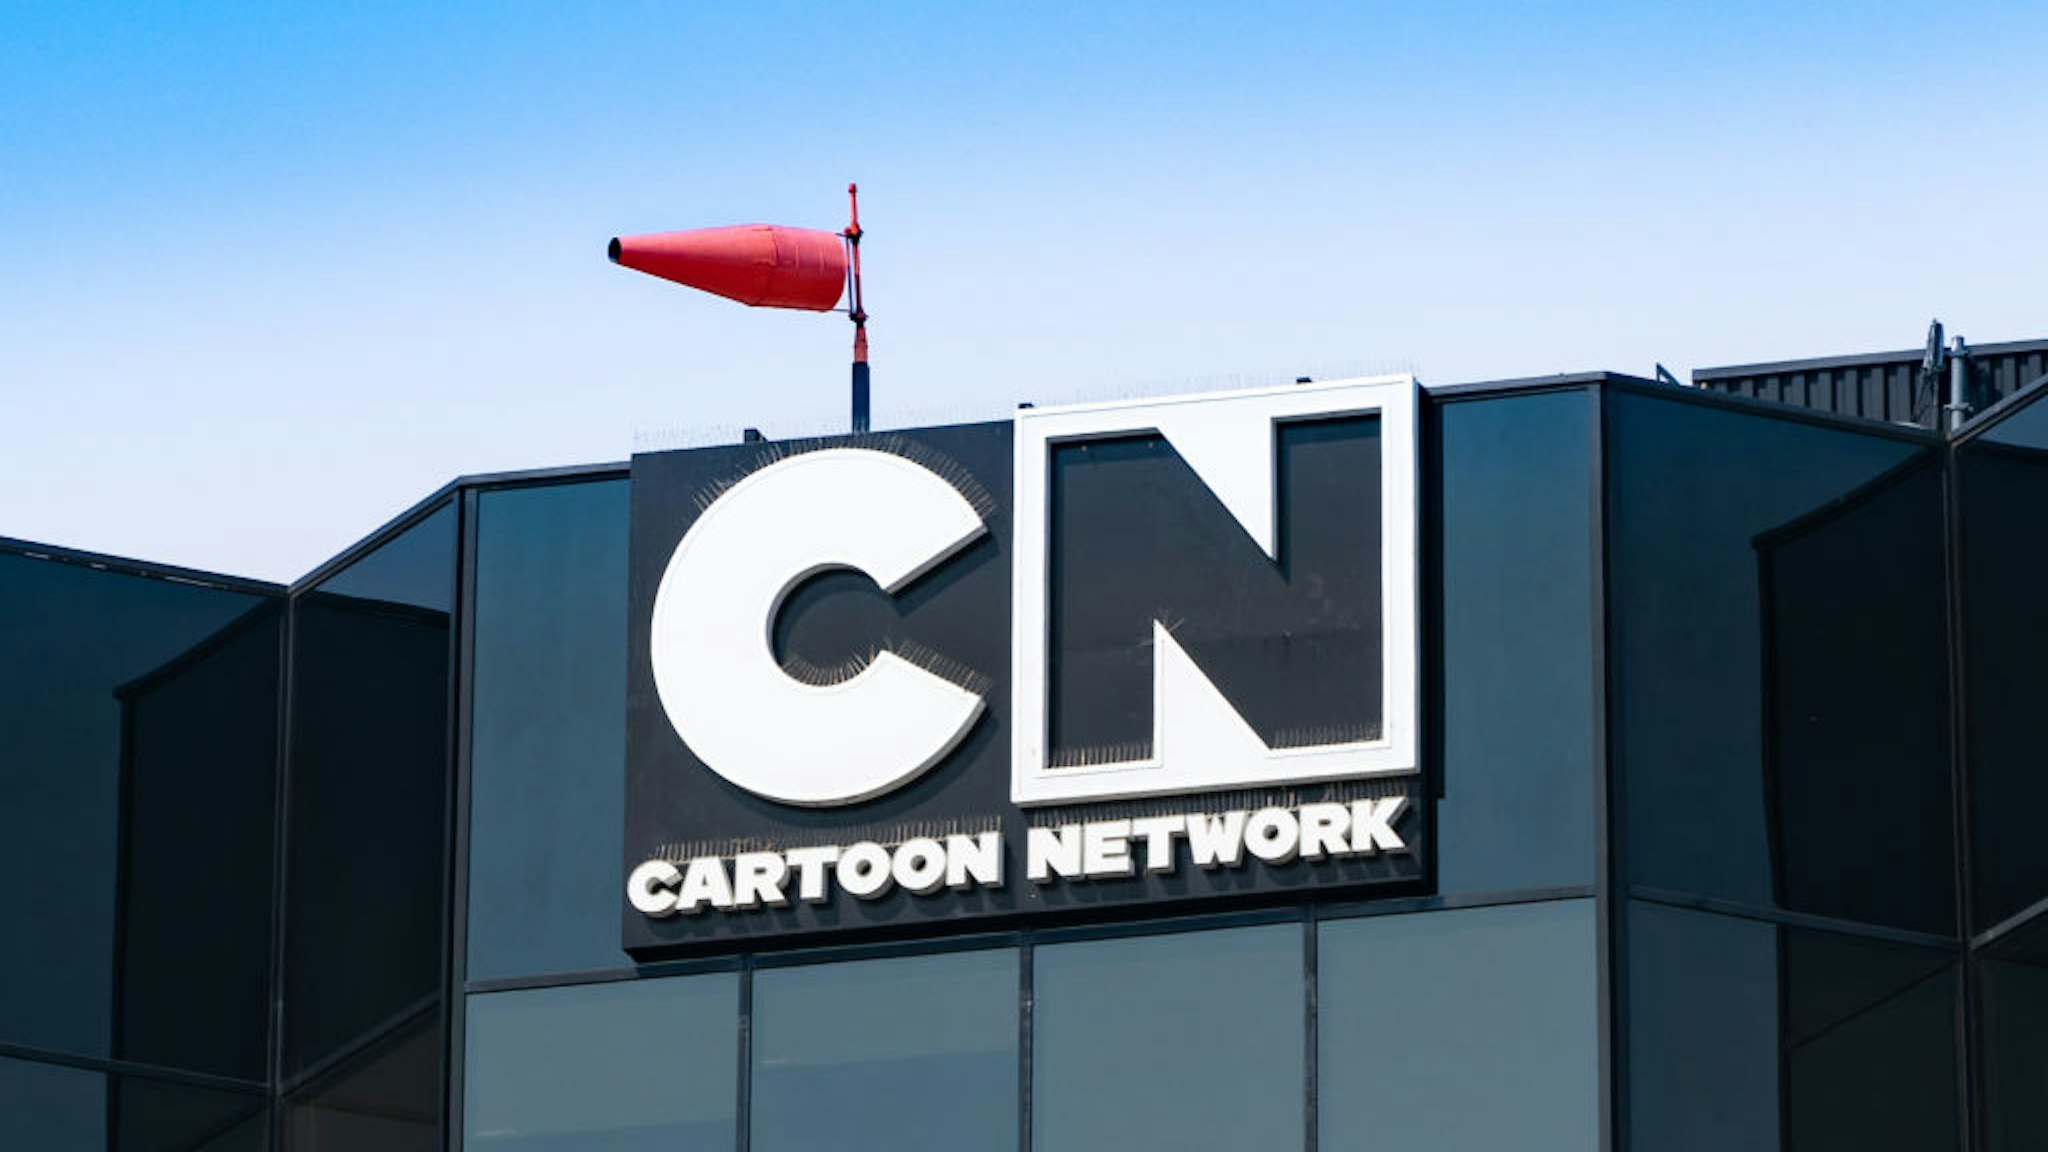 BURBANK, CA - AUGUST 19: General view of the Cartoon Network studio headquarters on August 19, 2020 in Burbank, California. (Photo by AaronP/Bauer-Griffin/GC Images)